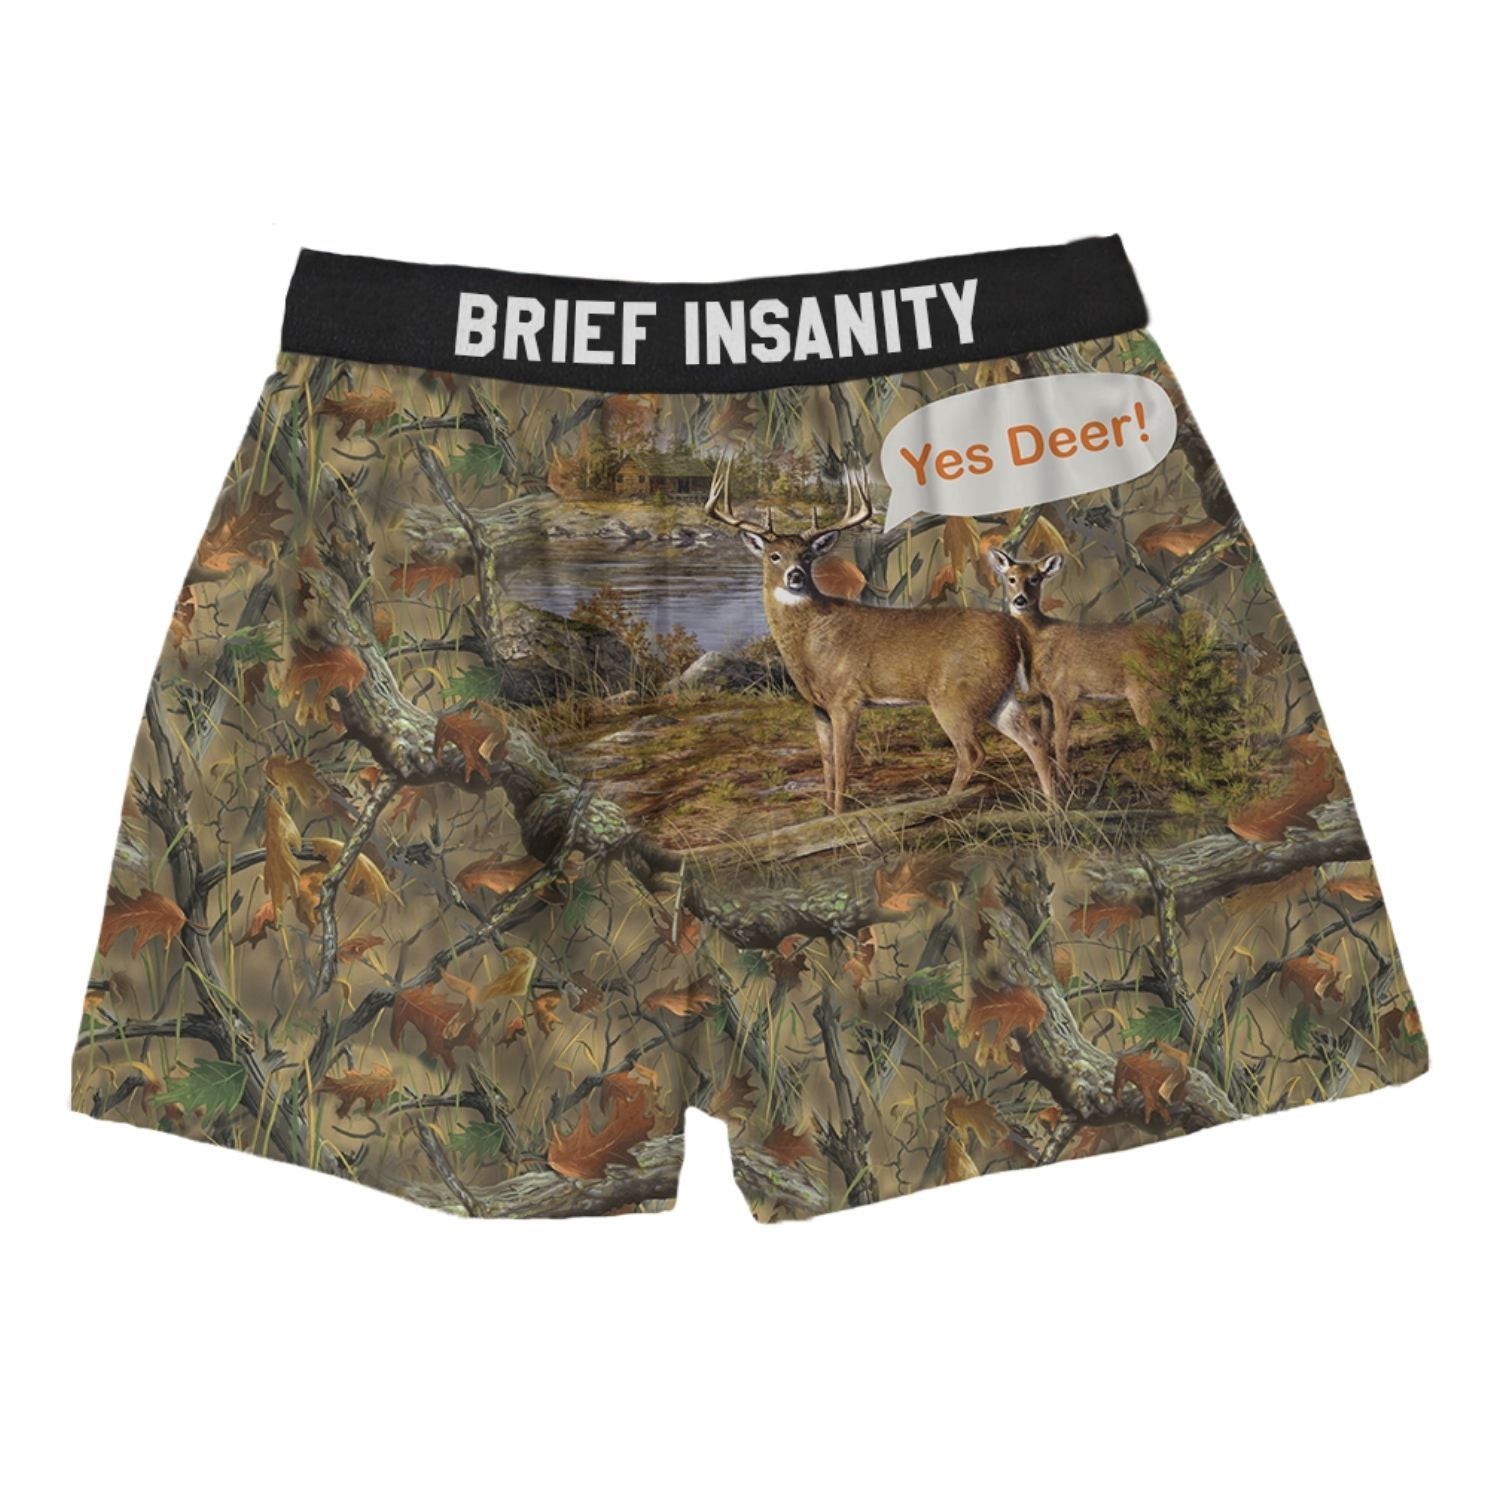 Boxers - Yes Deer camouflage Funny Boxer Shorts